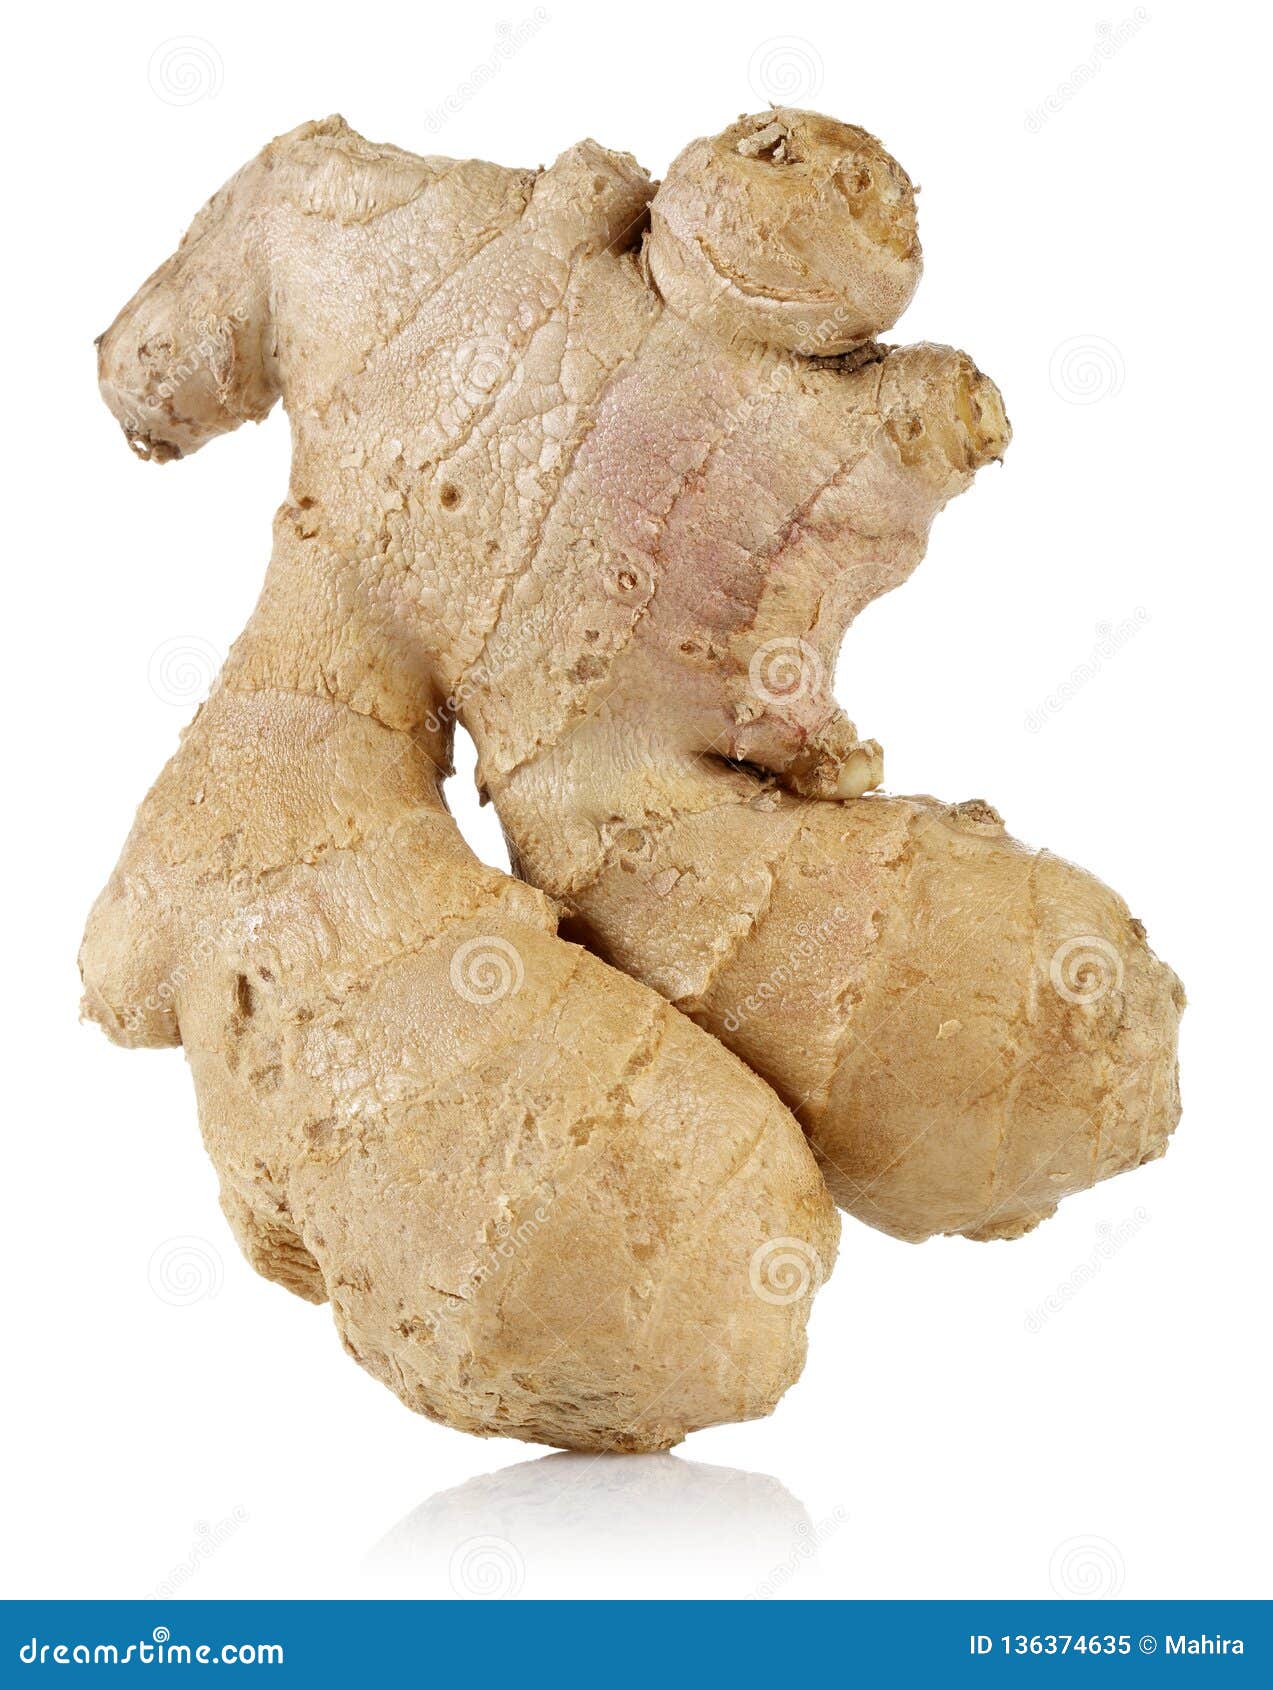 human-shaped-ginger-root-white-background-human-shaped-ginger-root-isolated-white-background-136374635.jpg